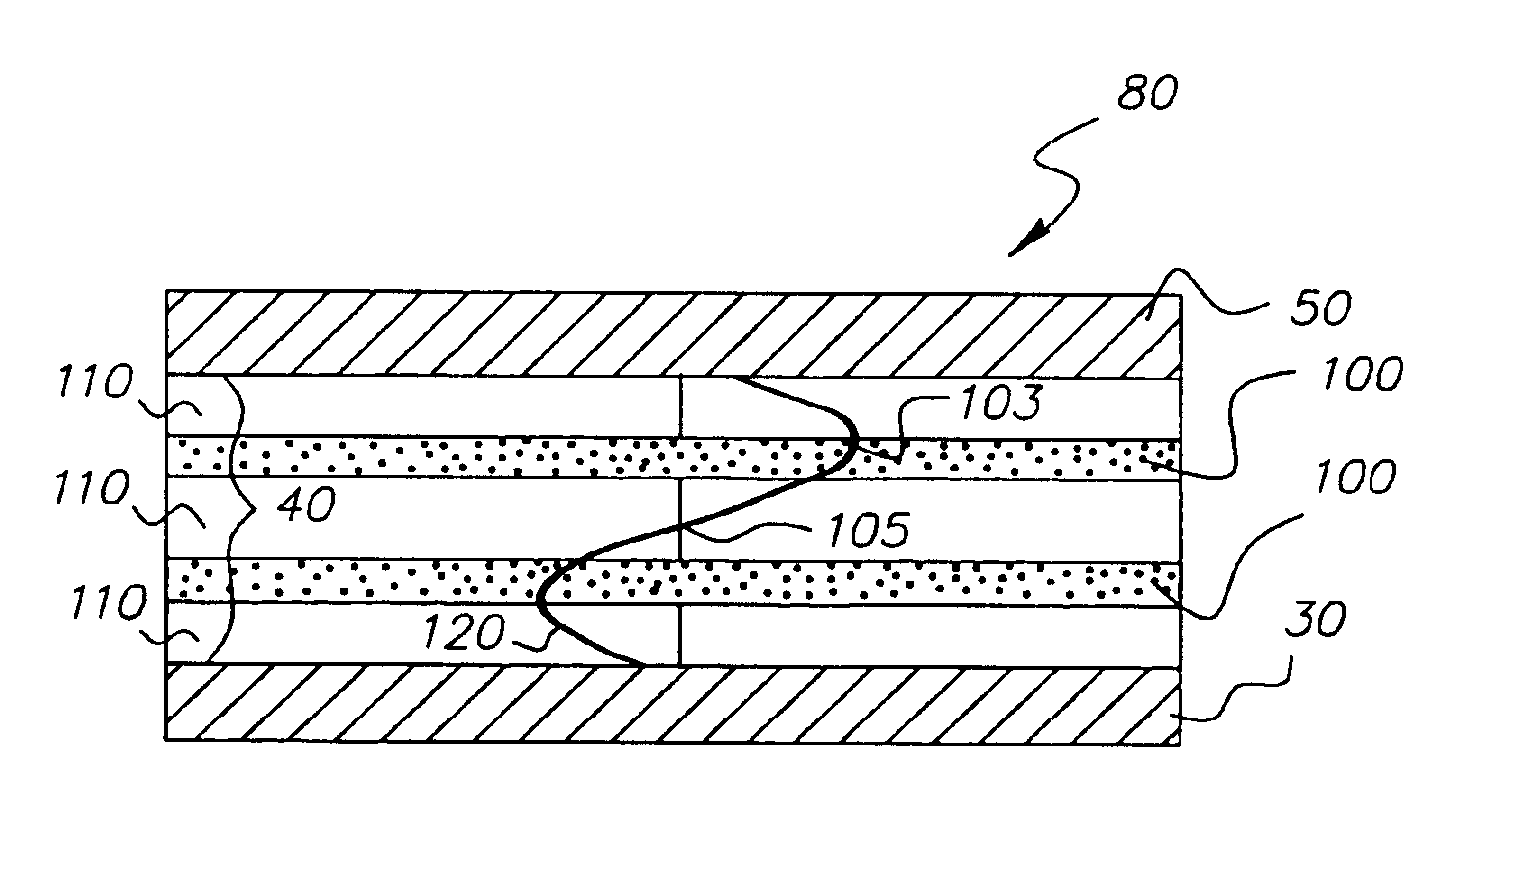 Organic laser cavity device having incoherent light as a pumping source